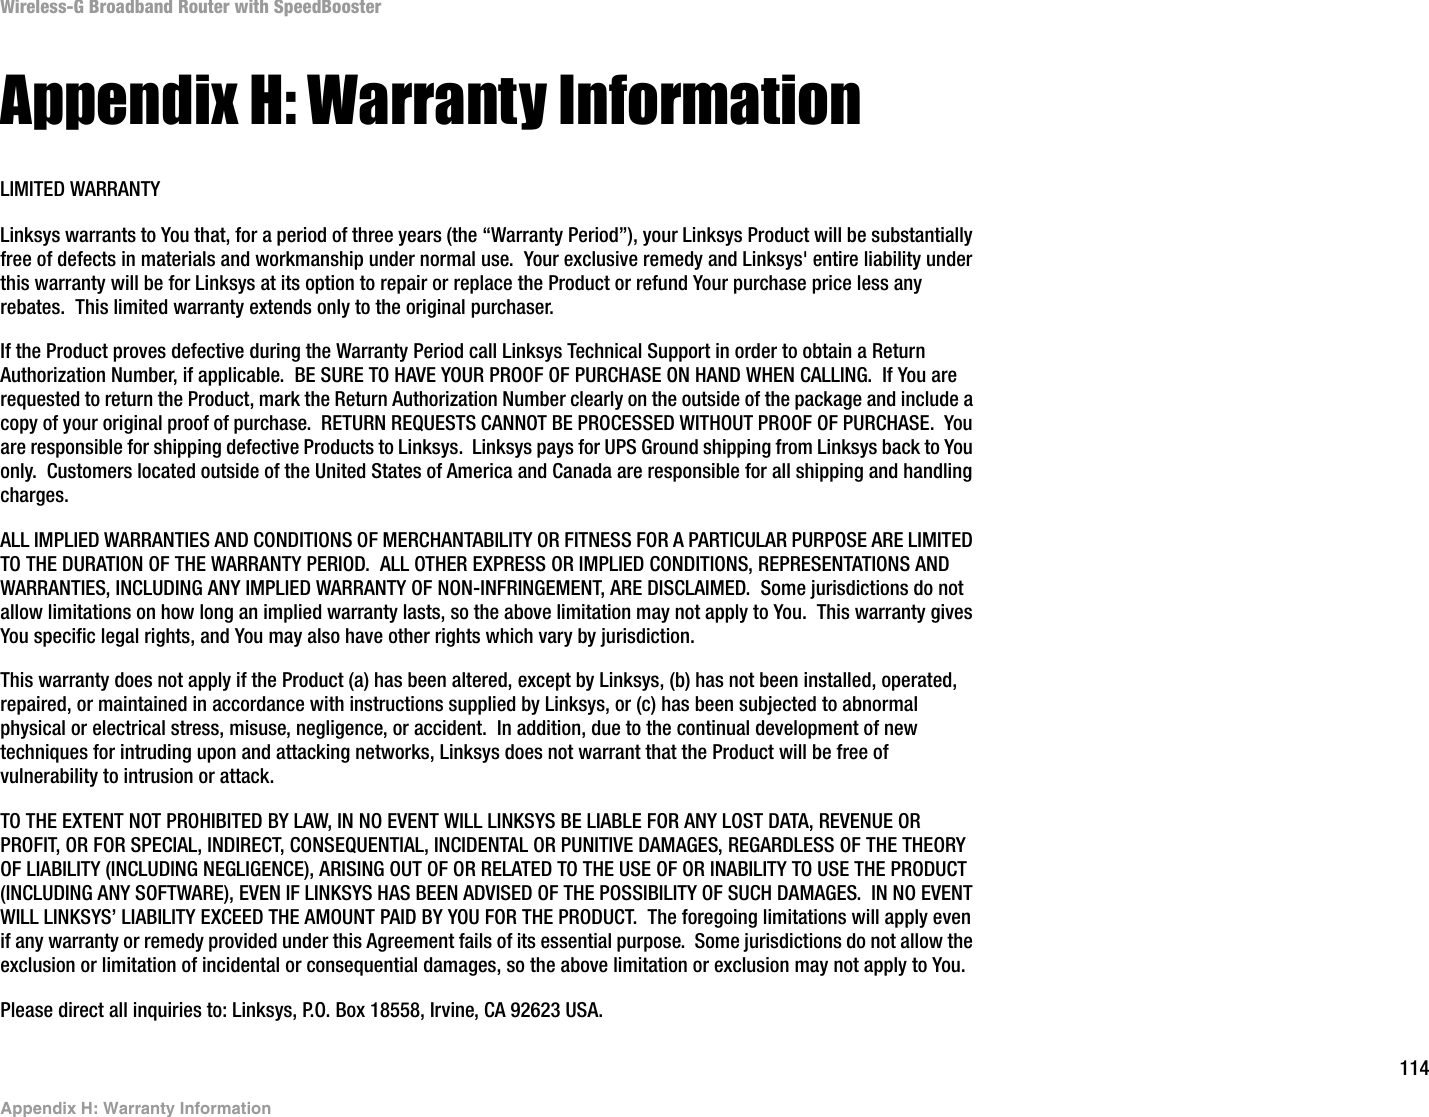 114Appendix H: Warranty InformationWireless-G Broadband Router with SpeedBoosterAppendix H: Warranty InformationLIMITED WARRANTYLinksys warrants to You that, for a period of three years (the “Warranty Period”), your Linksys Product will be substantially free of defects in materials and workmanship under normal use.  Your exclusive remedy and Linksys&apos; entire liability under this warranty will be for Linksys at its option to repair or replace the Product or refund Your purchase price less any rebates.  This limited warranty extends only to the original purchaser.  If the Product proves defective during the Warranty Period call Linksys Technical Support in order to obtain a Return Authorization Number, if applicable.  BE SURE TO HAVE YOUR PROOF OF PURCHASE ON HAND WHEN CALLING.  If You are requested to return the Product, mark the Return Authorization Number clearly on the outside of the package and include a copy of your original proof of purchase.  RETURN REQUESTS CANNOT BE PROCESSED WITHOUT PROOF OF PURCHASE.  You are responsible for shipping defective Products to Linksys.  Linksys pays for UPS Ground shipping from Linksys back to You only.  Customers located outside of the United States of America and Canada are responsible for all shipping and handling charges. ALL IMPLIED WARRANTIES AND CONDITIONS OF MERCHANTABILITY OR FITNESS FOR A PARTICULAR PURPOSE ARE LIMITED TO THE DURATION OF THE WARRANTY PERIOD.  ALL OTHER EXPRESS OR IMPLIED CONDITIONS, REPRESENTATIONS AND WARRANTIES, INCLUDING ANY IMPLIED WARRANTY OF NON-INFRINGEMENT, ARE DISCLAIMED.  Some jurisdictions do not allow limitations on how long an implied warranty lasts, so the above limitation may not apply to You.  This warranty gives You specific legal rights, and You may also have other rights which vary by jurisdiction.This warranty does not apply if the Product (a) has been altered, except by Linksys, (b) has not been installed, operated, repaired, or maintained in accordance with instructions supplied by Linksys, or (c) has been subjected to abnormal physical or electrical stress, misuse, negligence, or accident.  In addition, due to the continual development of new techniques for intruding upon and attacking networks, Linksys does not warrant that the Product will be free of vulnerability to intrusion or attack.TO THE EXTENT NOT PROHIBITED BY LAW, IN NO EVENT WILL LINKSYS BE LIABLE FOR ANY LOST DATA, REVENUE OR PROFIT, OR FOR SPECIAL, INDIRECT, CONSEQUENTIAL, INCIDENTAL OR PUNITIVE DAMAGES, REGARDLESS OF THE THEORY OF LIABILITY (INCLUDING NEGLIGENCE), ARISING OUT OF OR RELATED TO THE USE OF OR INABILITY TO USE THE PRODUCT (INCLUDING ANY SOFTWARE), EVEN IF LINKSYS HAS BEEN ADVISED OF THE POSSIBILITY OF SUCH DAMAGES.  IN NO EVENT WILL LINKSYS’ LIABILITY EXCEED THE AMOUNT PAID BY YOU FOR THE PRODUCT.  The foregoing limitations will apply even if any warranty or remedy provided under this Agreement fails of its essential purpose.  Some jurisdictions do not allow the exclusion or limitation of incidental or consequential damages, so the above limitation or exclusion may not apply to You.Please direct all inquiries to: Linksys, P.O. Box 18558, Irvine, CA 92623 USA.